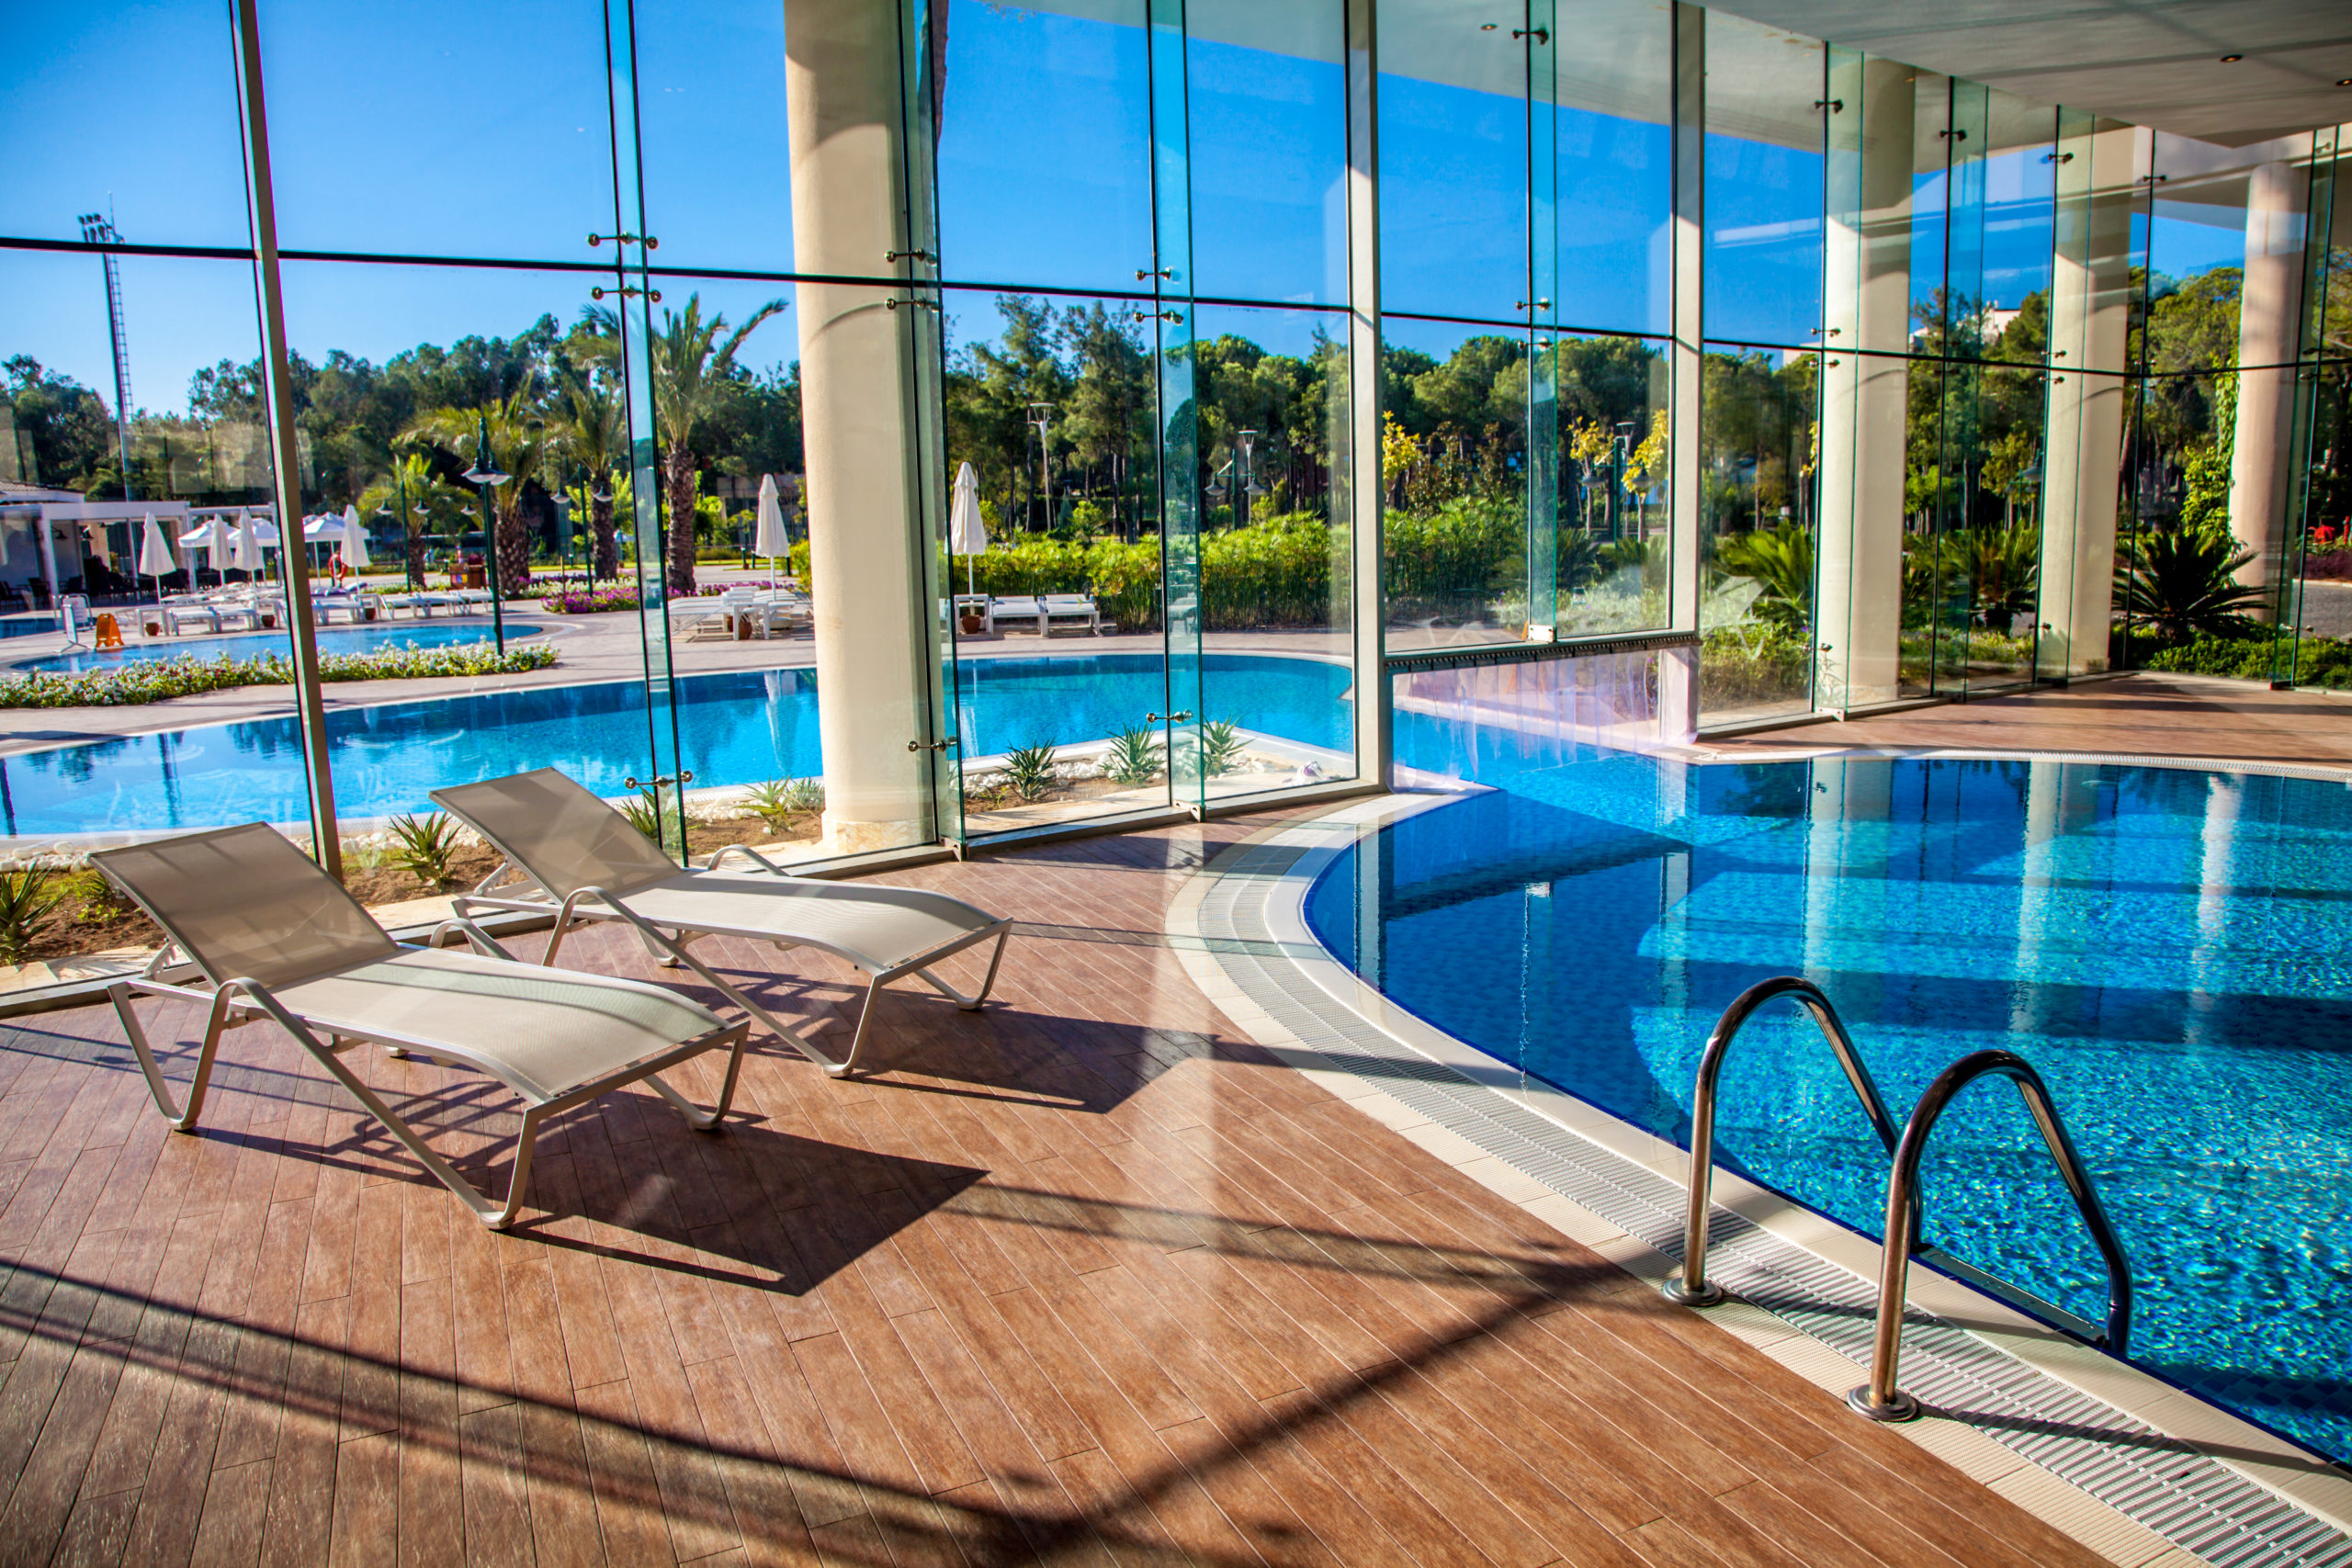 A pool with a ventilation system to ensure proper air circulation and reduce humidity within the pool area